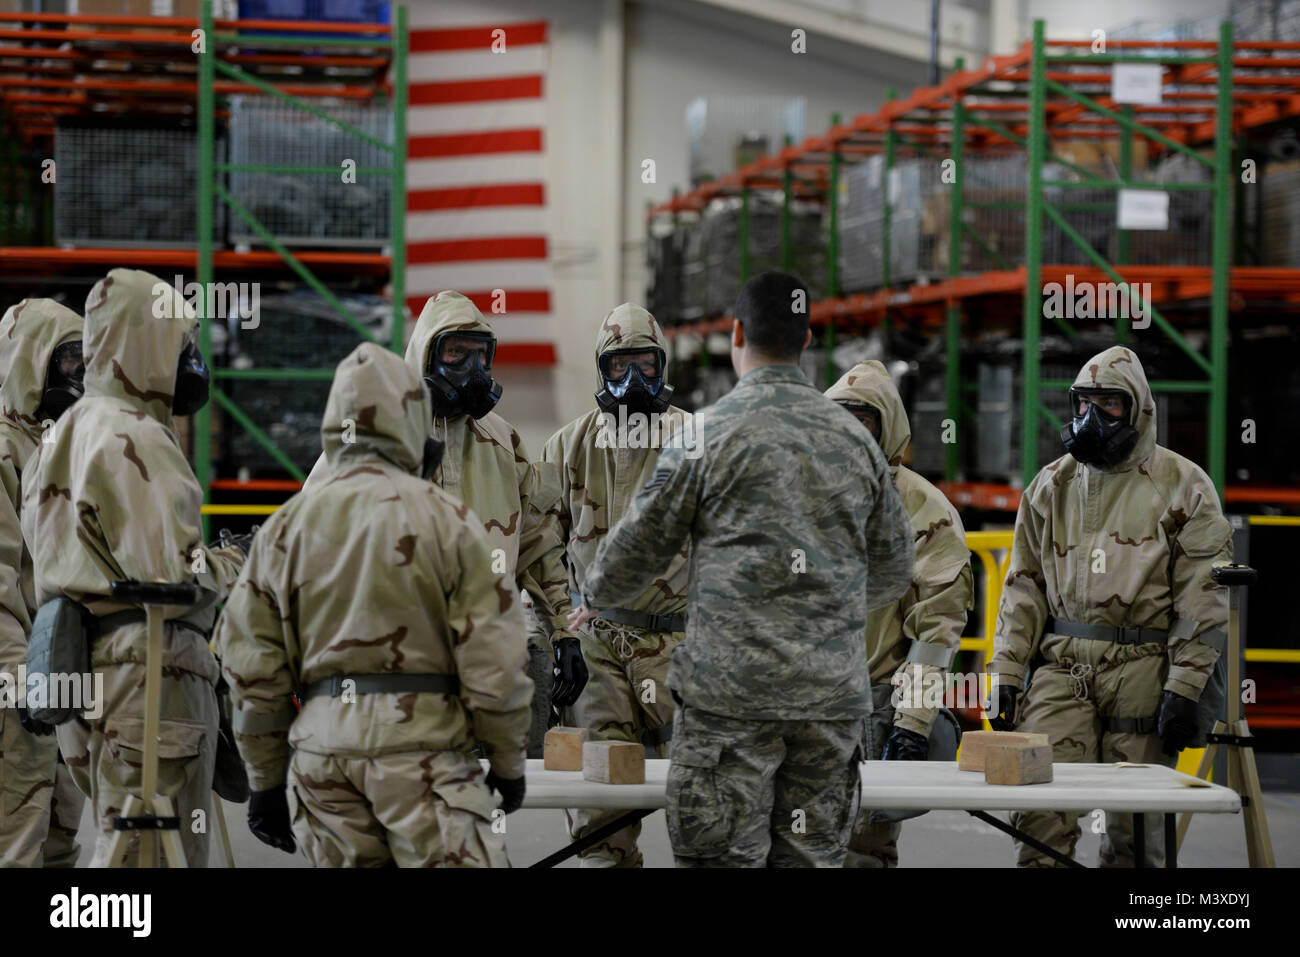 Airmen of Team Dover receive instruction during a Chemical, Biological, Radiological and Nuclear (CBRN) training session Jan. 31, 2018, at Dover Air Force Base, Del. During a suspected CBRN attack, all activities must be accomplished in the Mission Oriented Protective Posture, or MOPP gear, seen in the photo. (U.S. Air Force photo by Staff Sgt. Aaron J. Jenne) Stock Photo